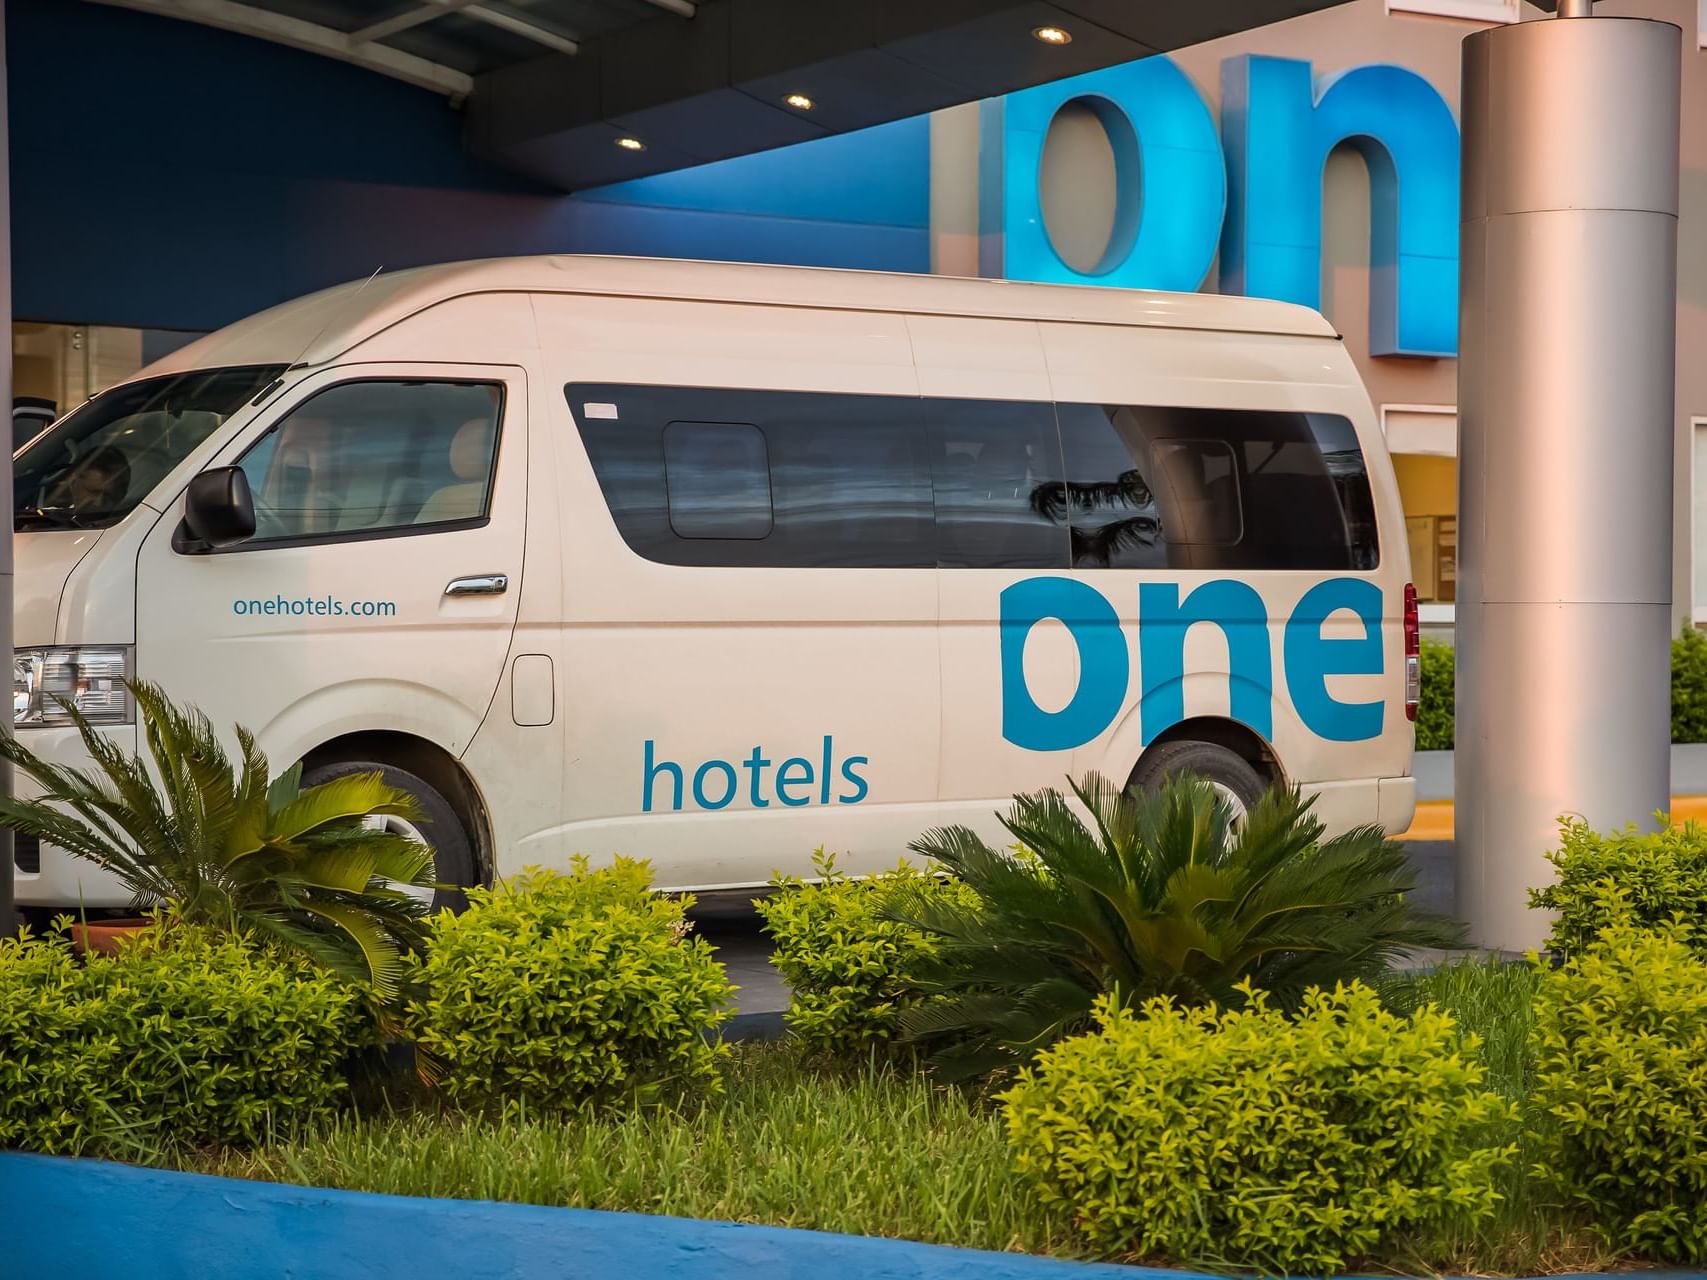 A van from One Hotels Transport service, parked at the entrance